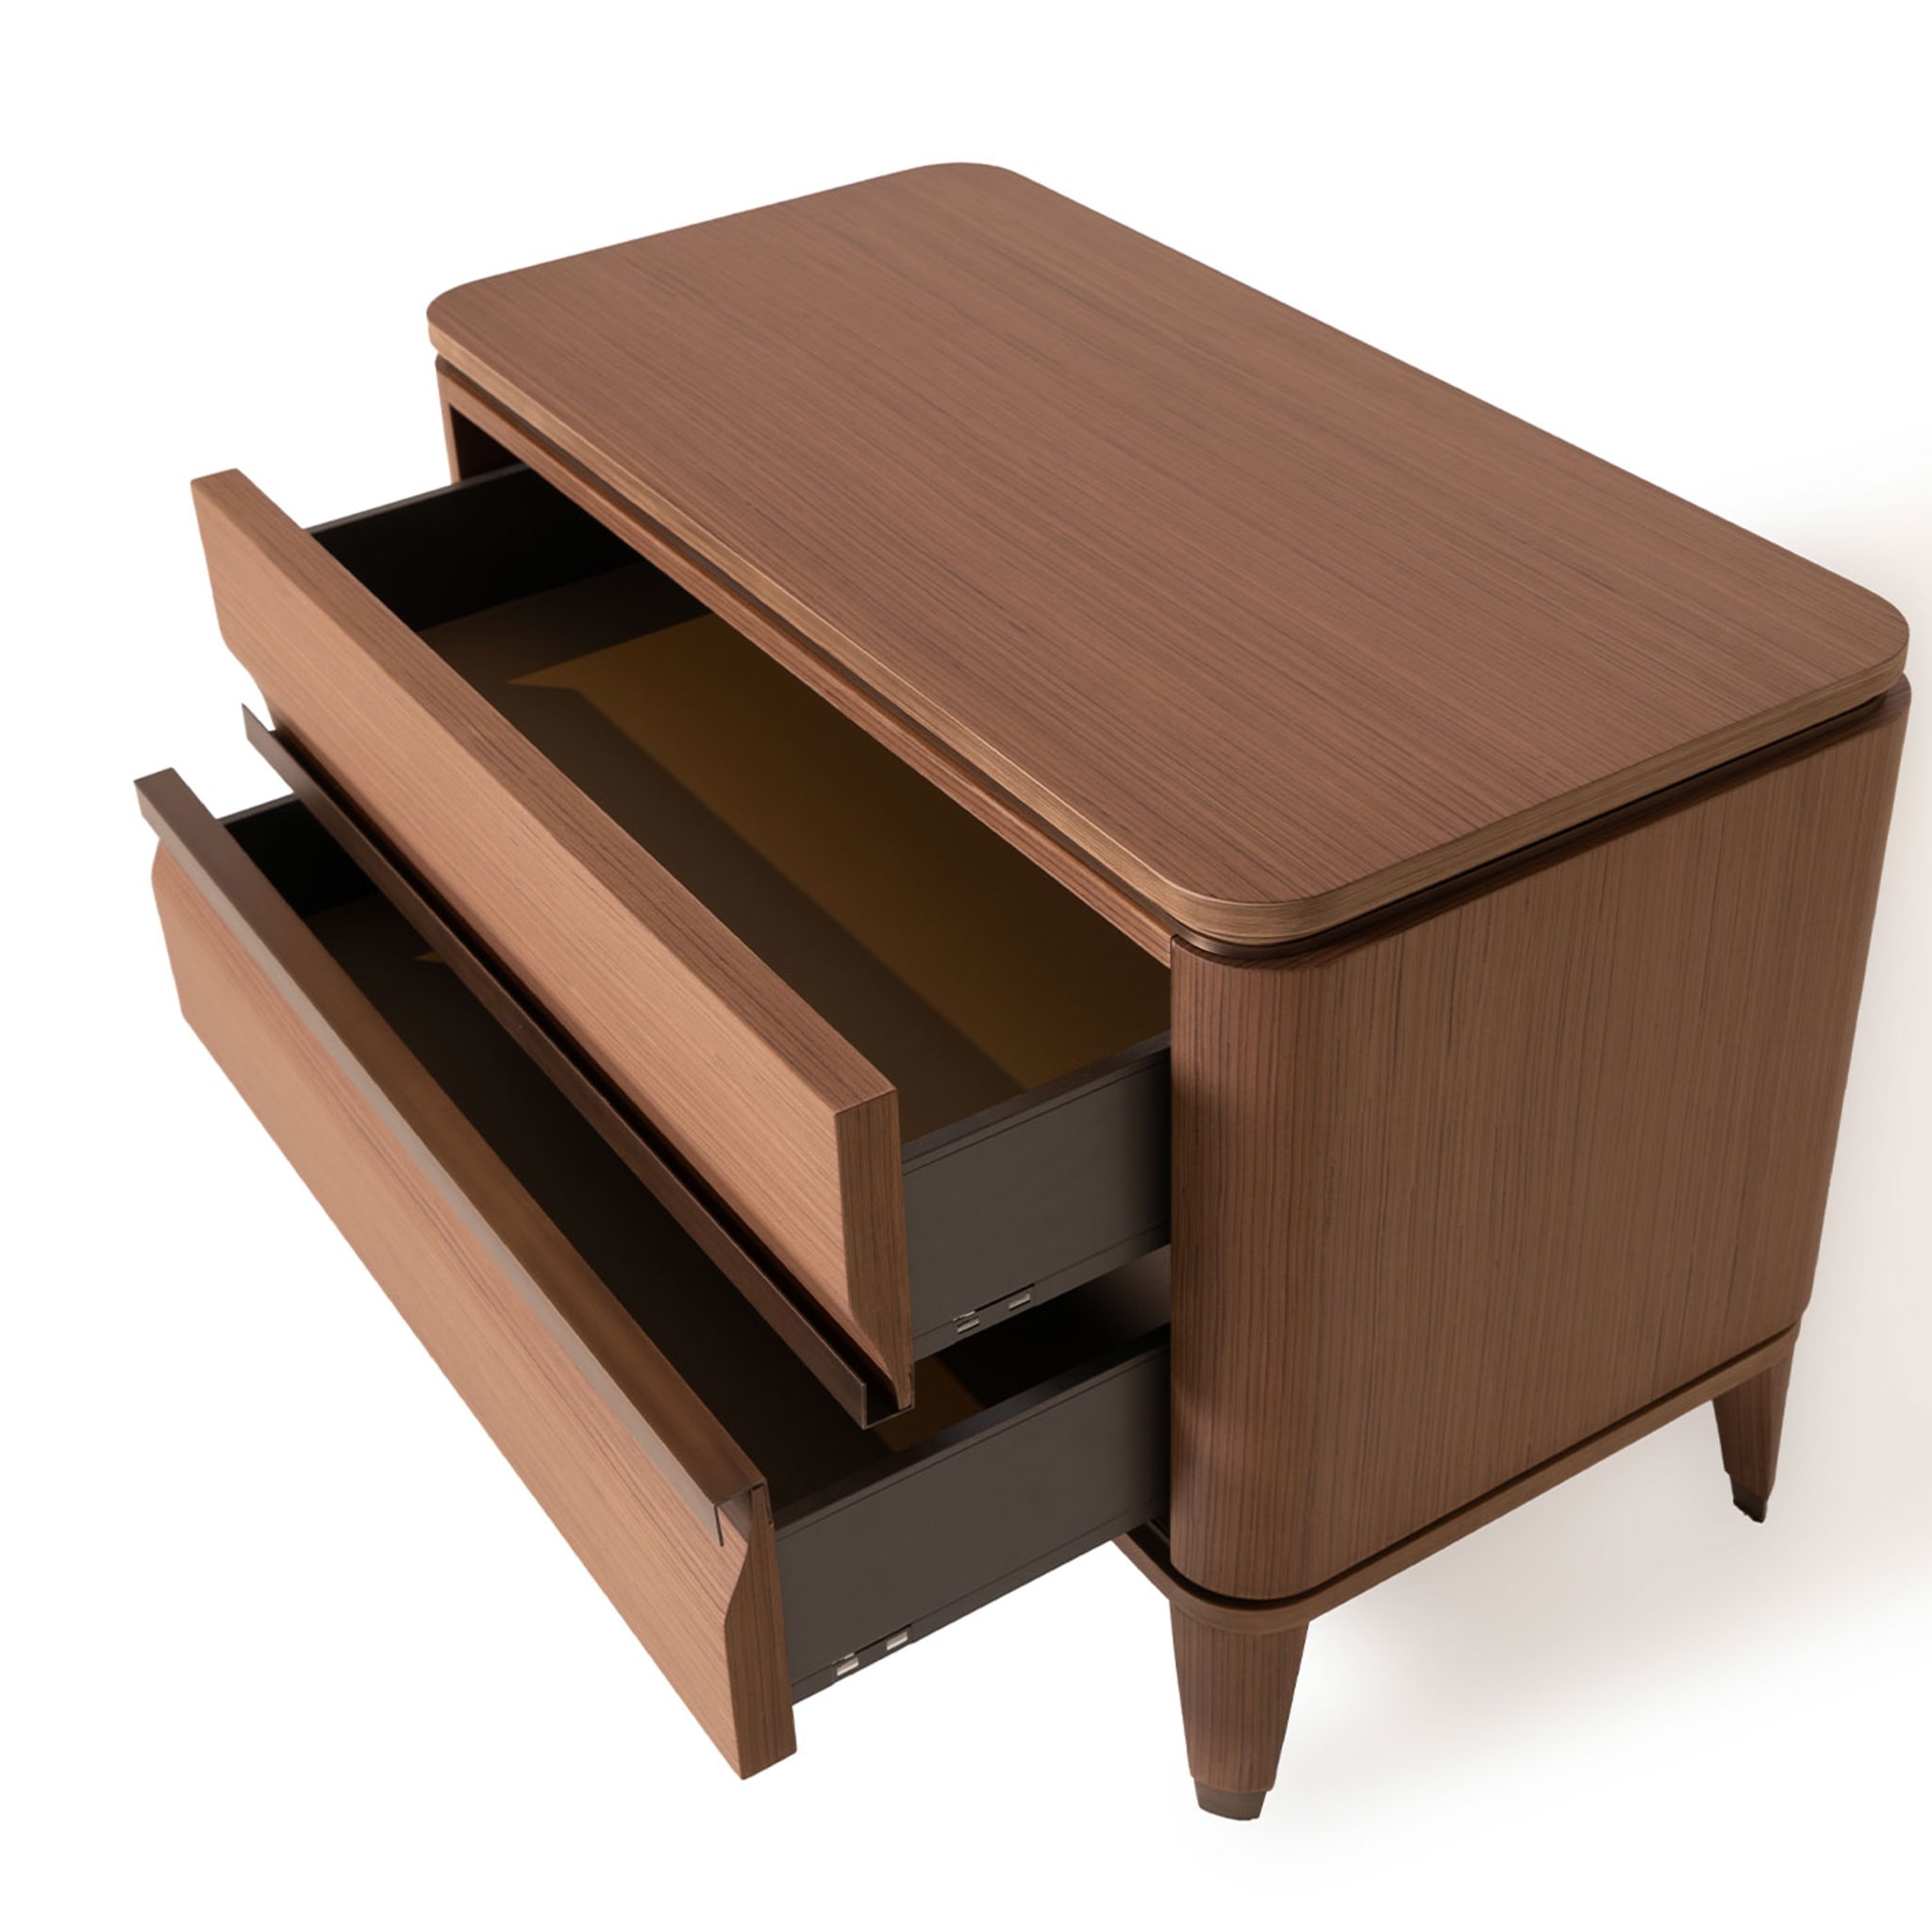 Ercolino Night Stand Extra Large with Rosewood Finish  - Alternative view 3